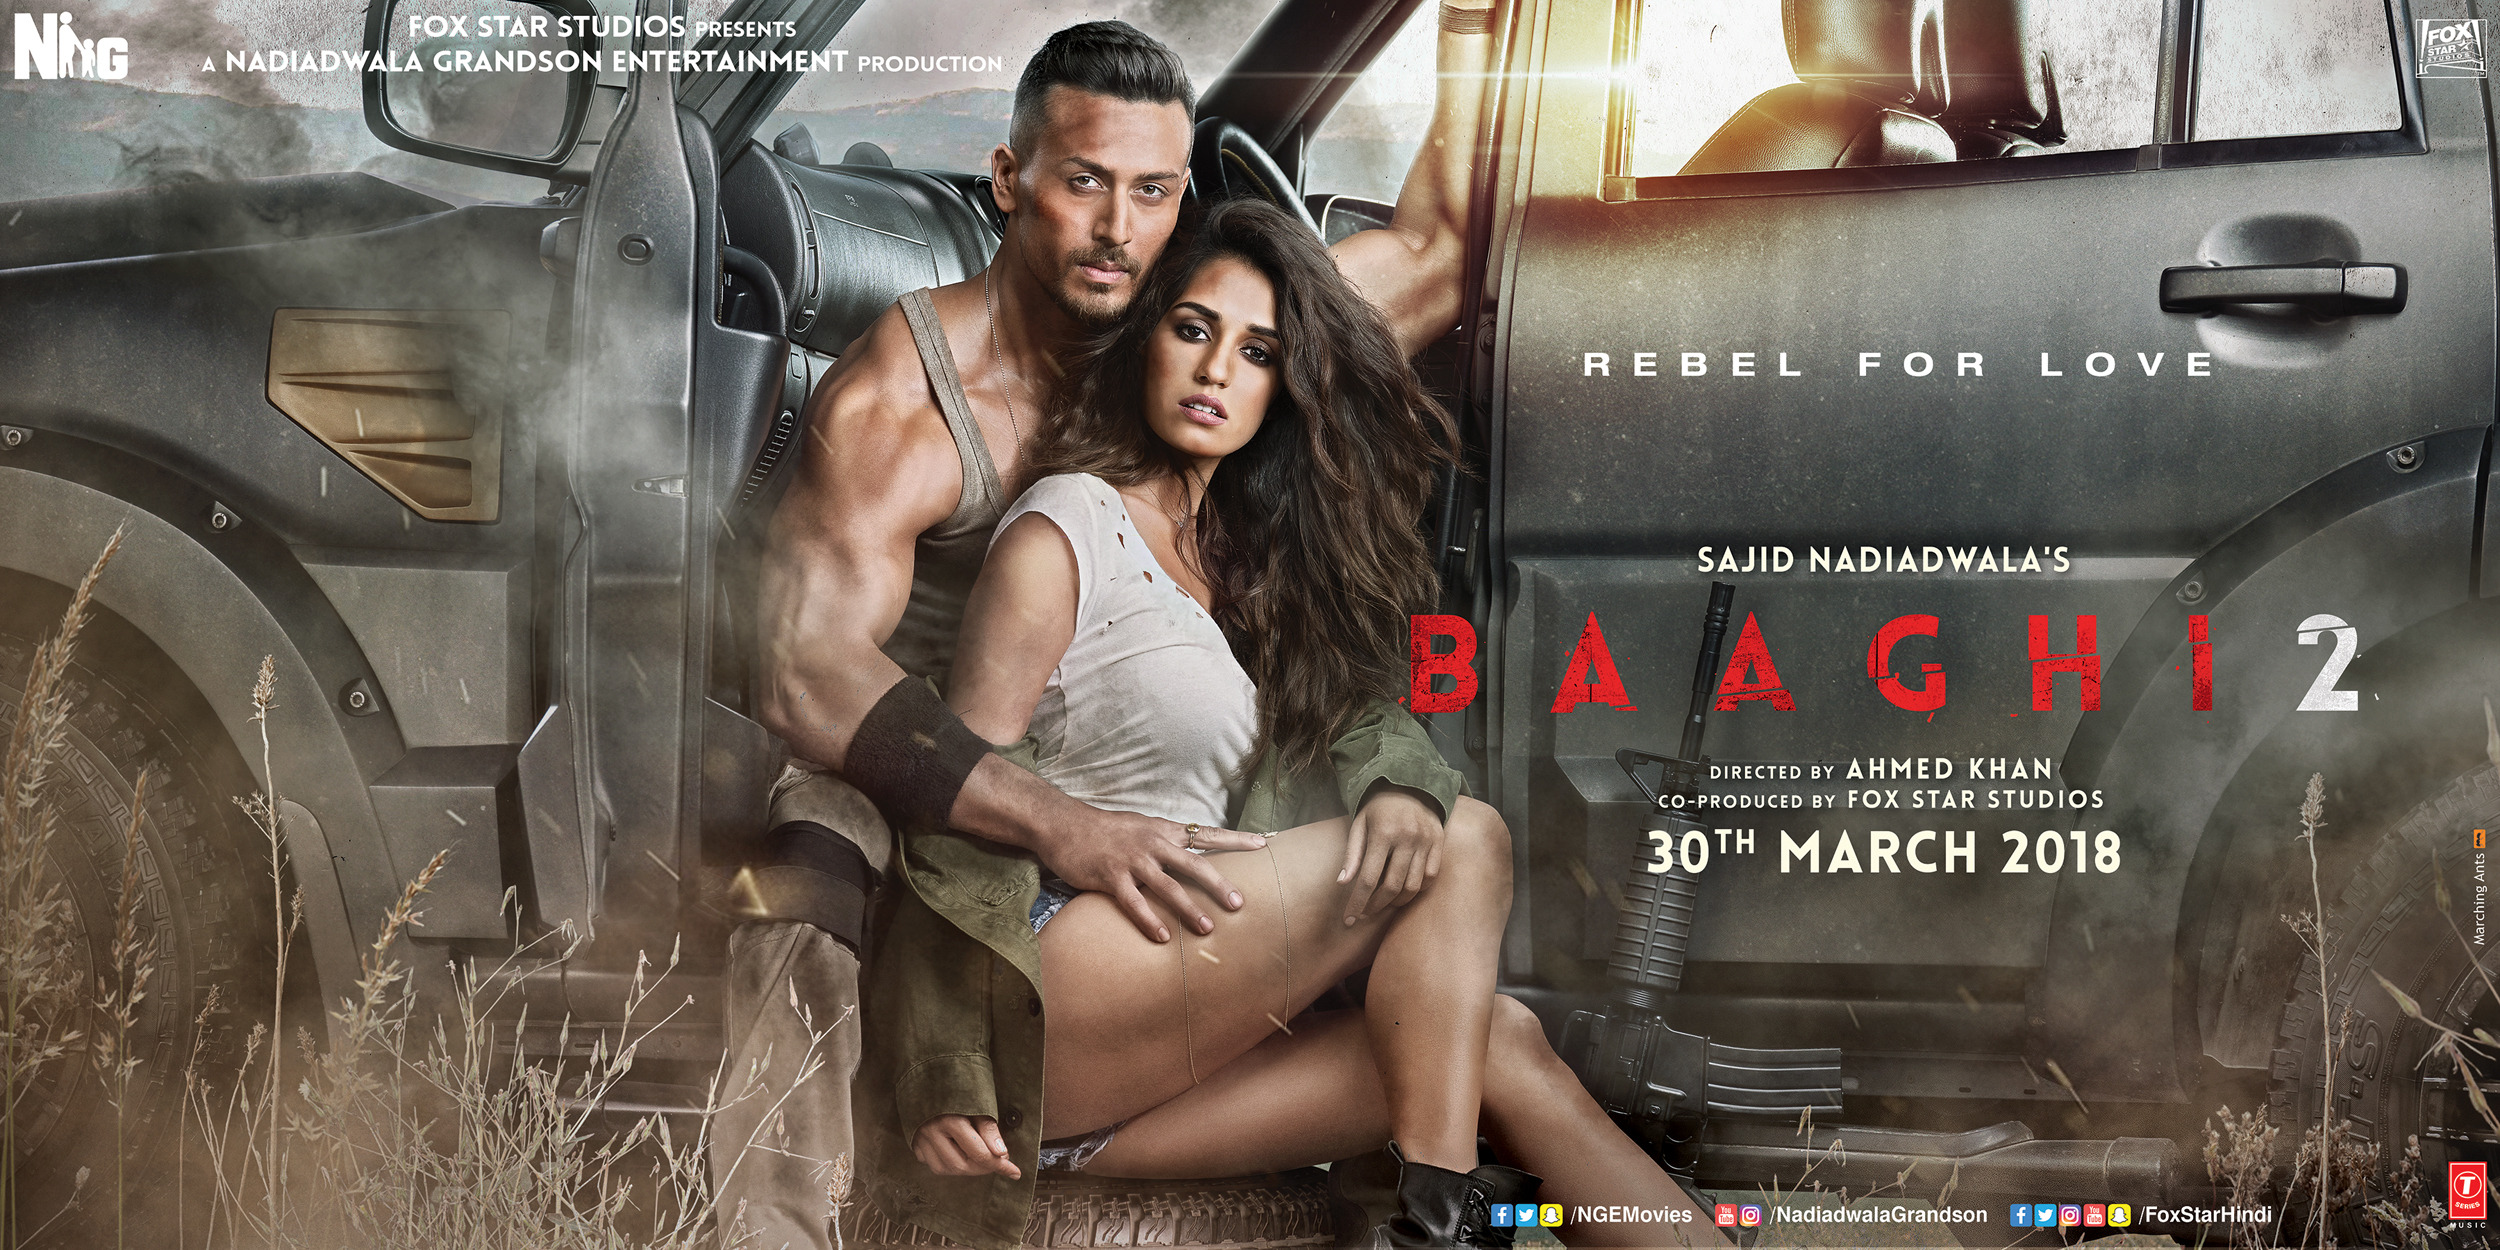 Mega Sized Movie Poster Image for Baaghi 2 (#4 of 6)